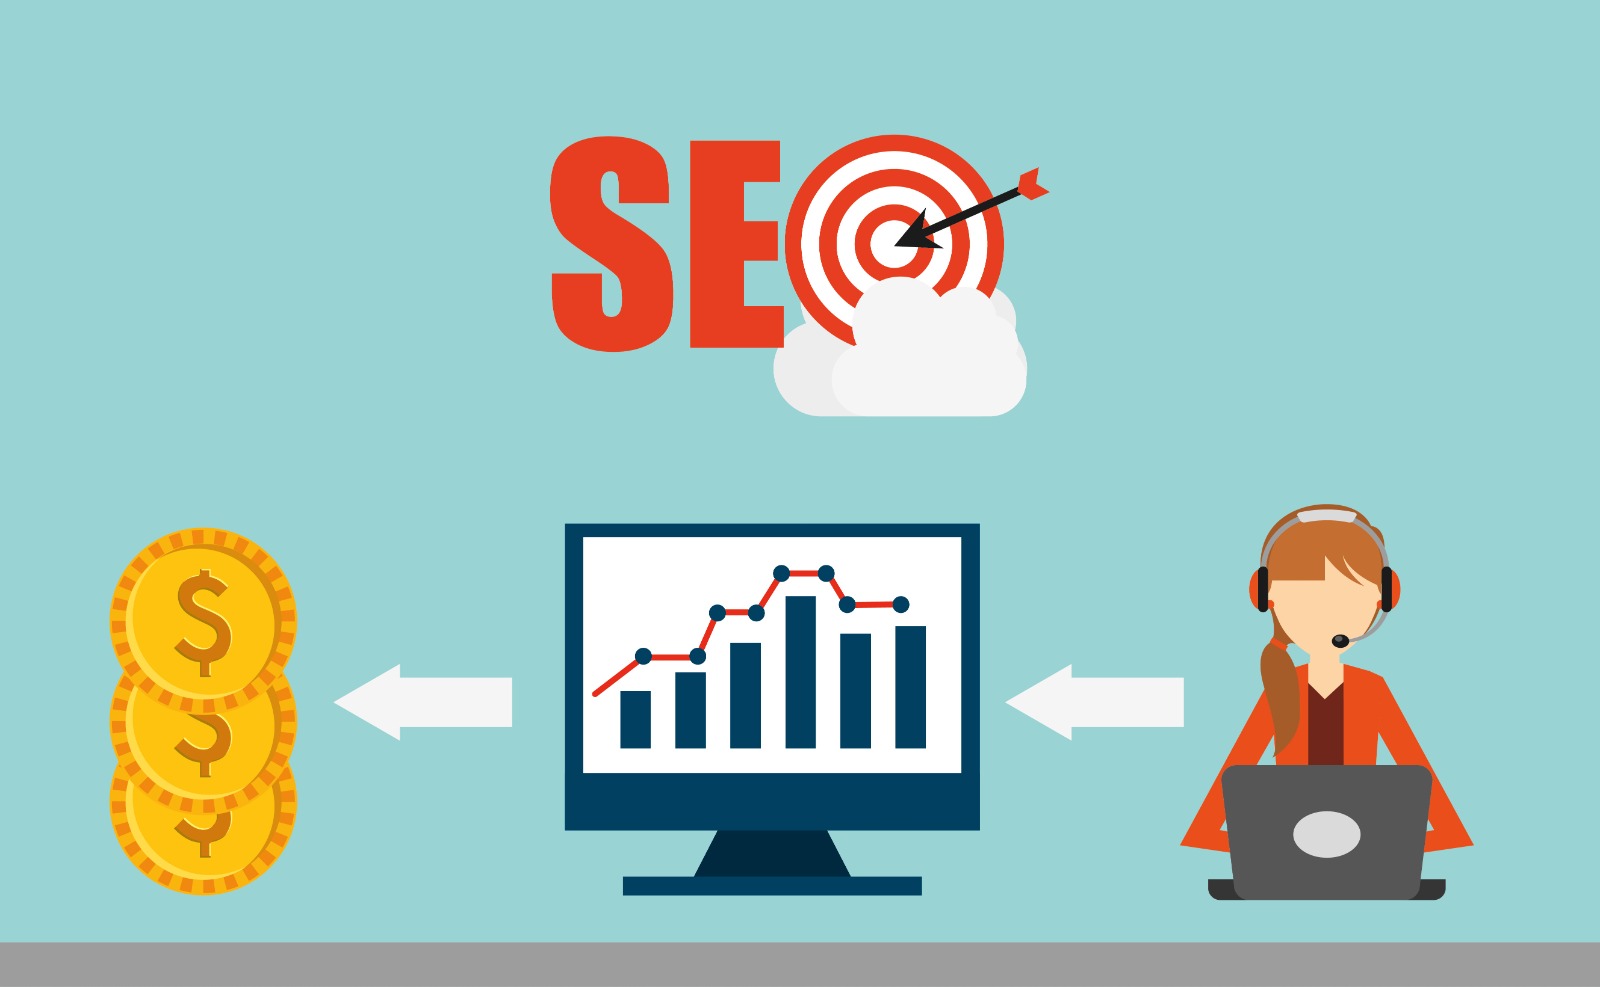 Monthly SEO Services